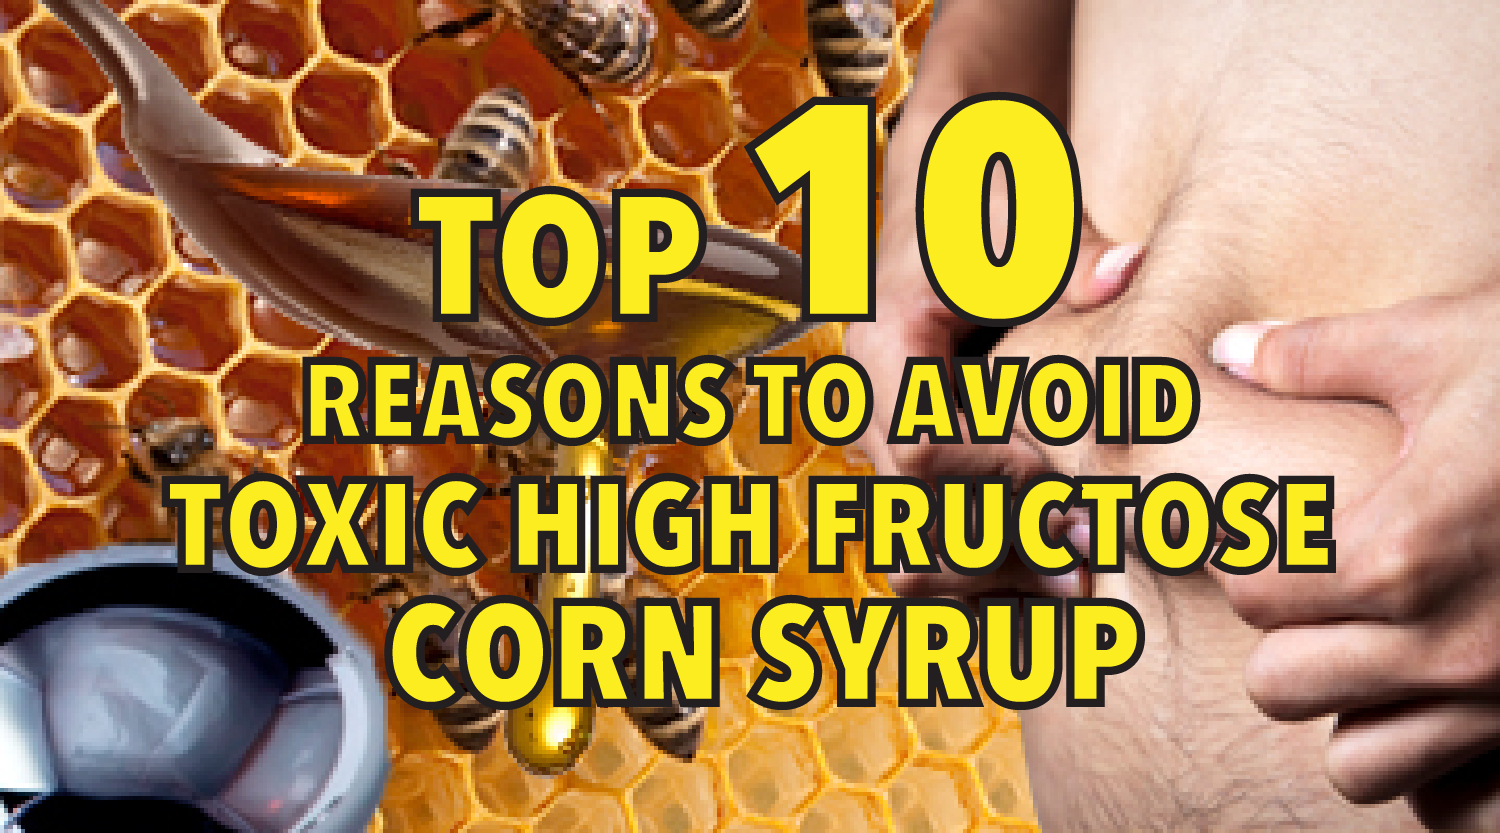 Top 10 reasons to avoid toxic high-fructose corn syrup